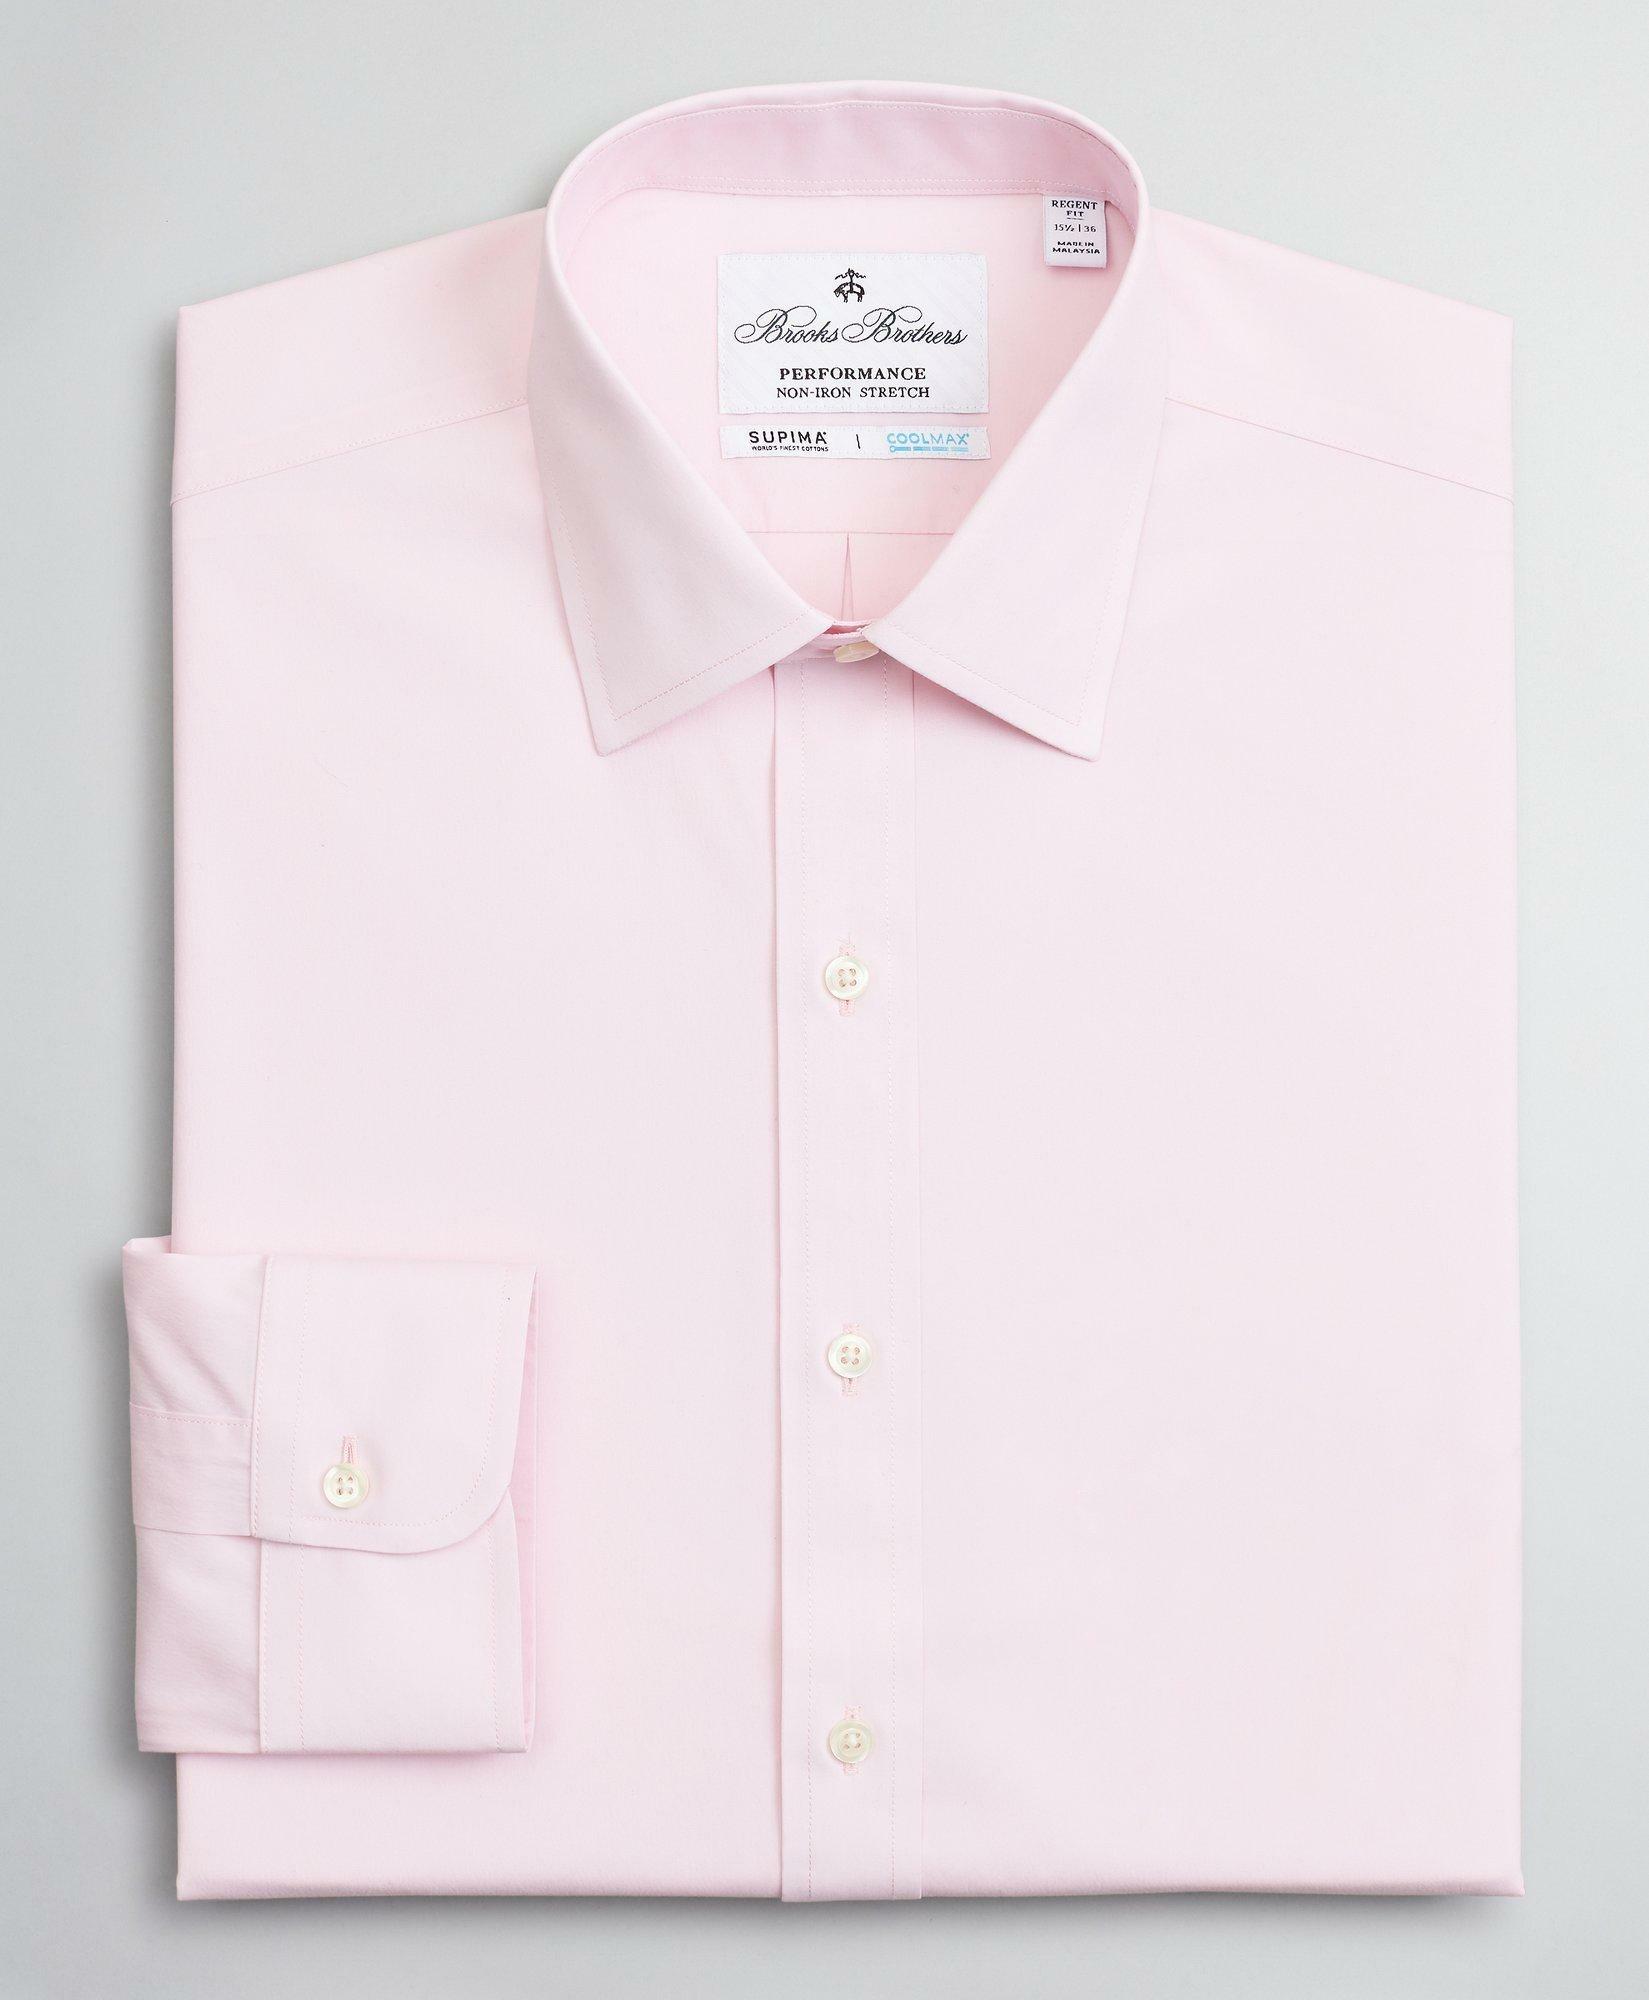 Brooks Brothers Men's Regent Regular-Fit Dress Shirt, Performance Non-Iron with COOLMAX, Ainsley Collar Twill | Pink